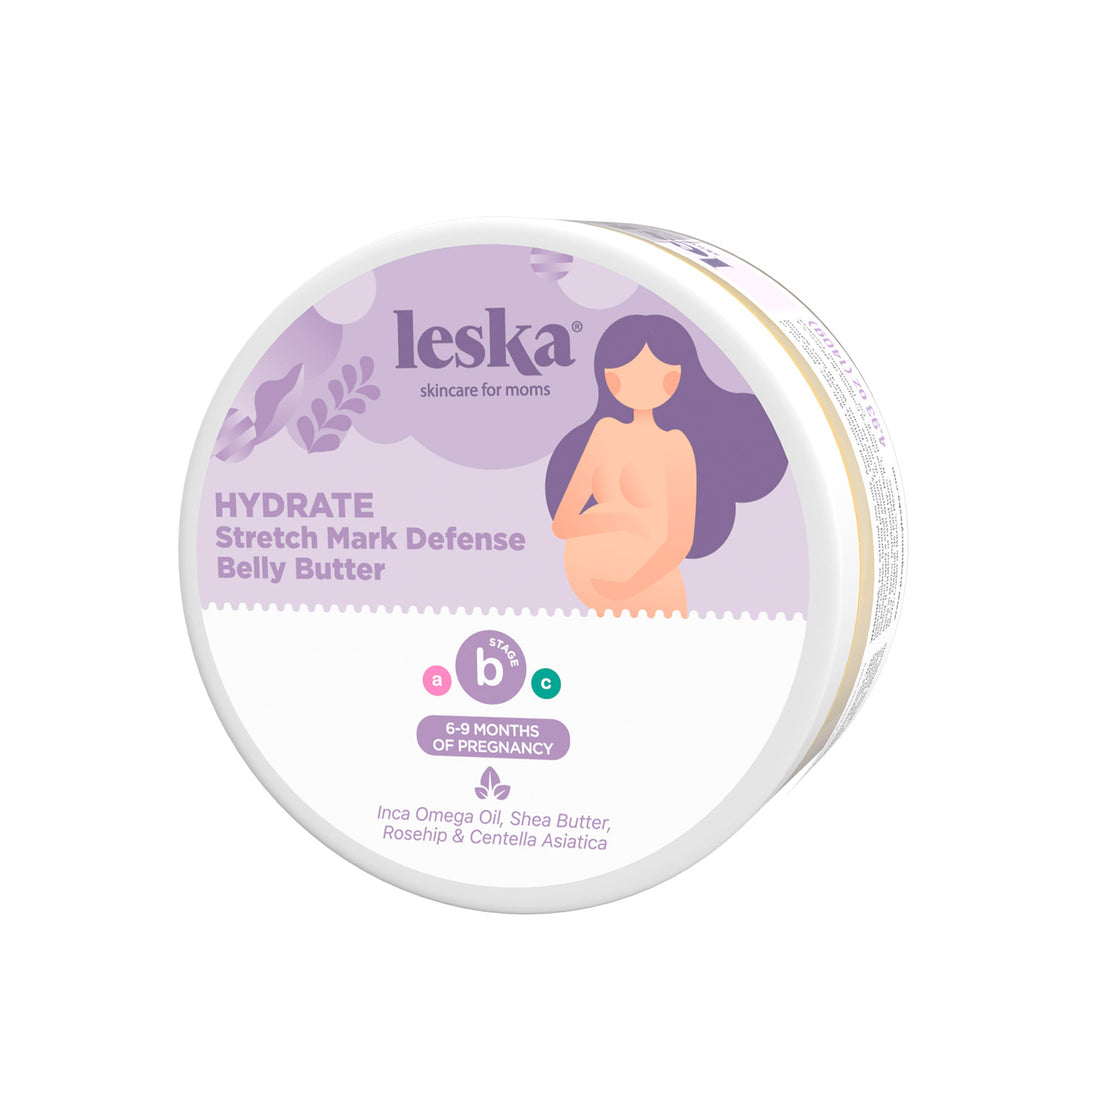 STAGE B - HYDRATE STRETCH MARK DEFENSE BELLY BUTTER